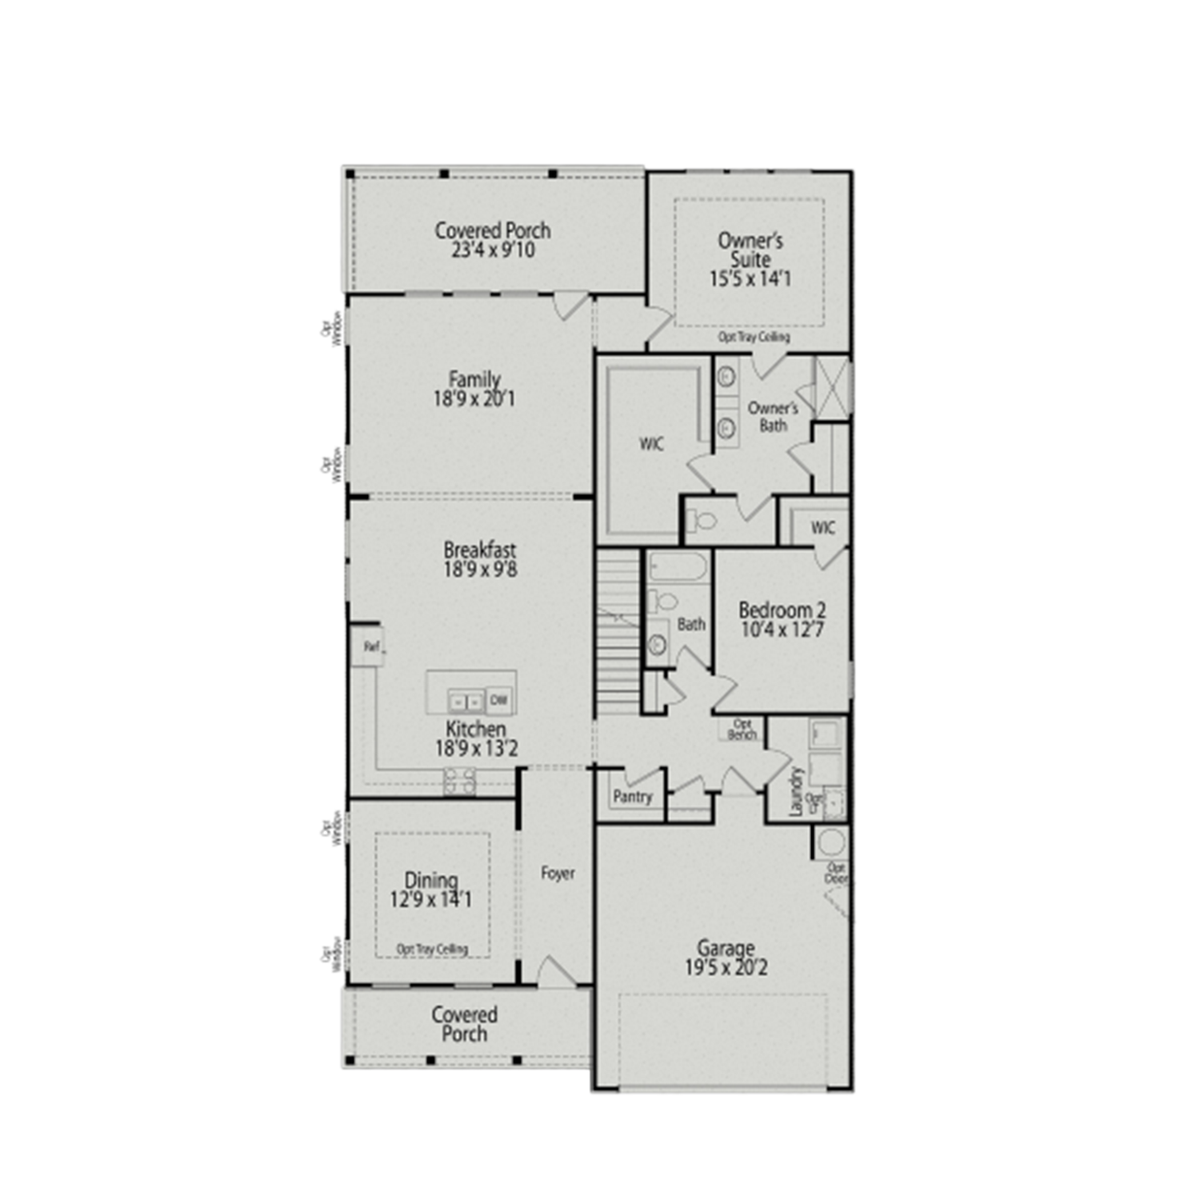 1 - Birch II A floor plan layout for 63 Golden Leaf Farms Road in Davidson Homes' Tobacco Road community.